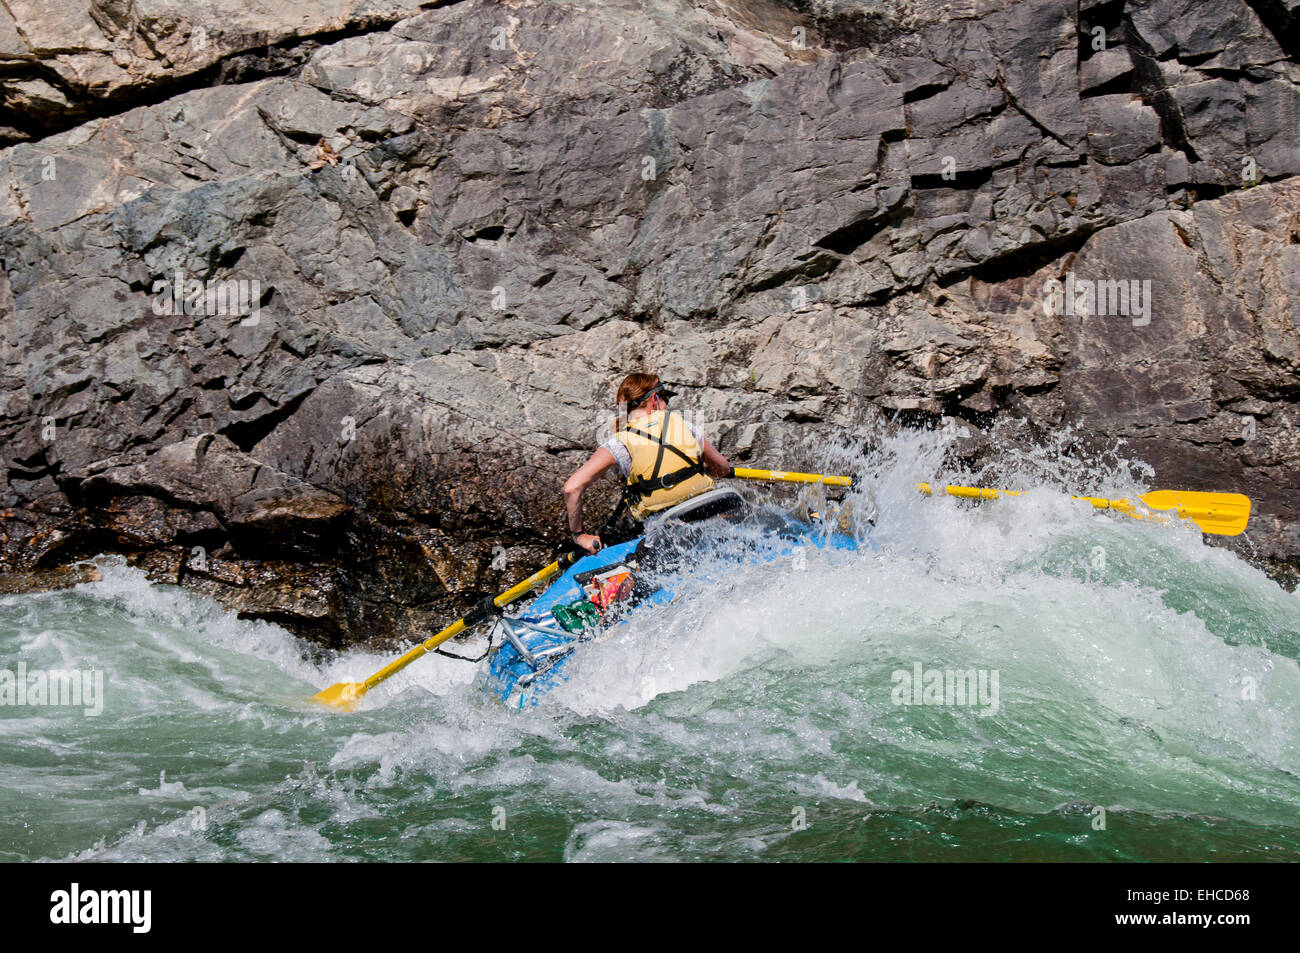 Woman rafter rowing through Upper Cliffside Rapid (class IV) on the Middle Fork of the Salmon River, Idaho Stock Photo